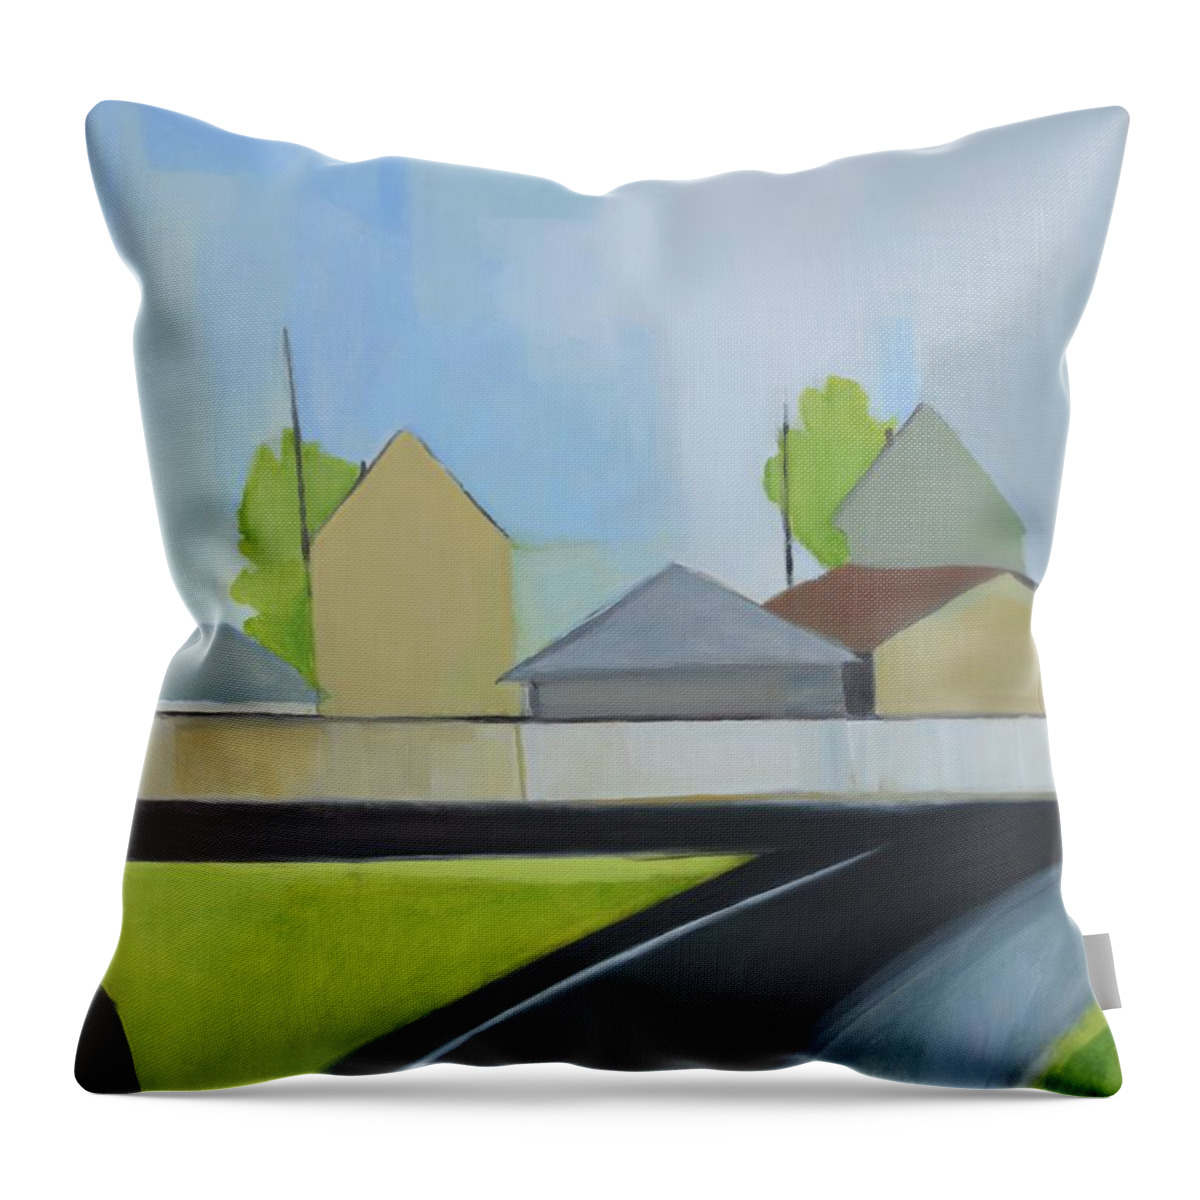 Suburban Landscape Throw Pillow featuring the painting Hackensack Exit by Ron Erickson